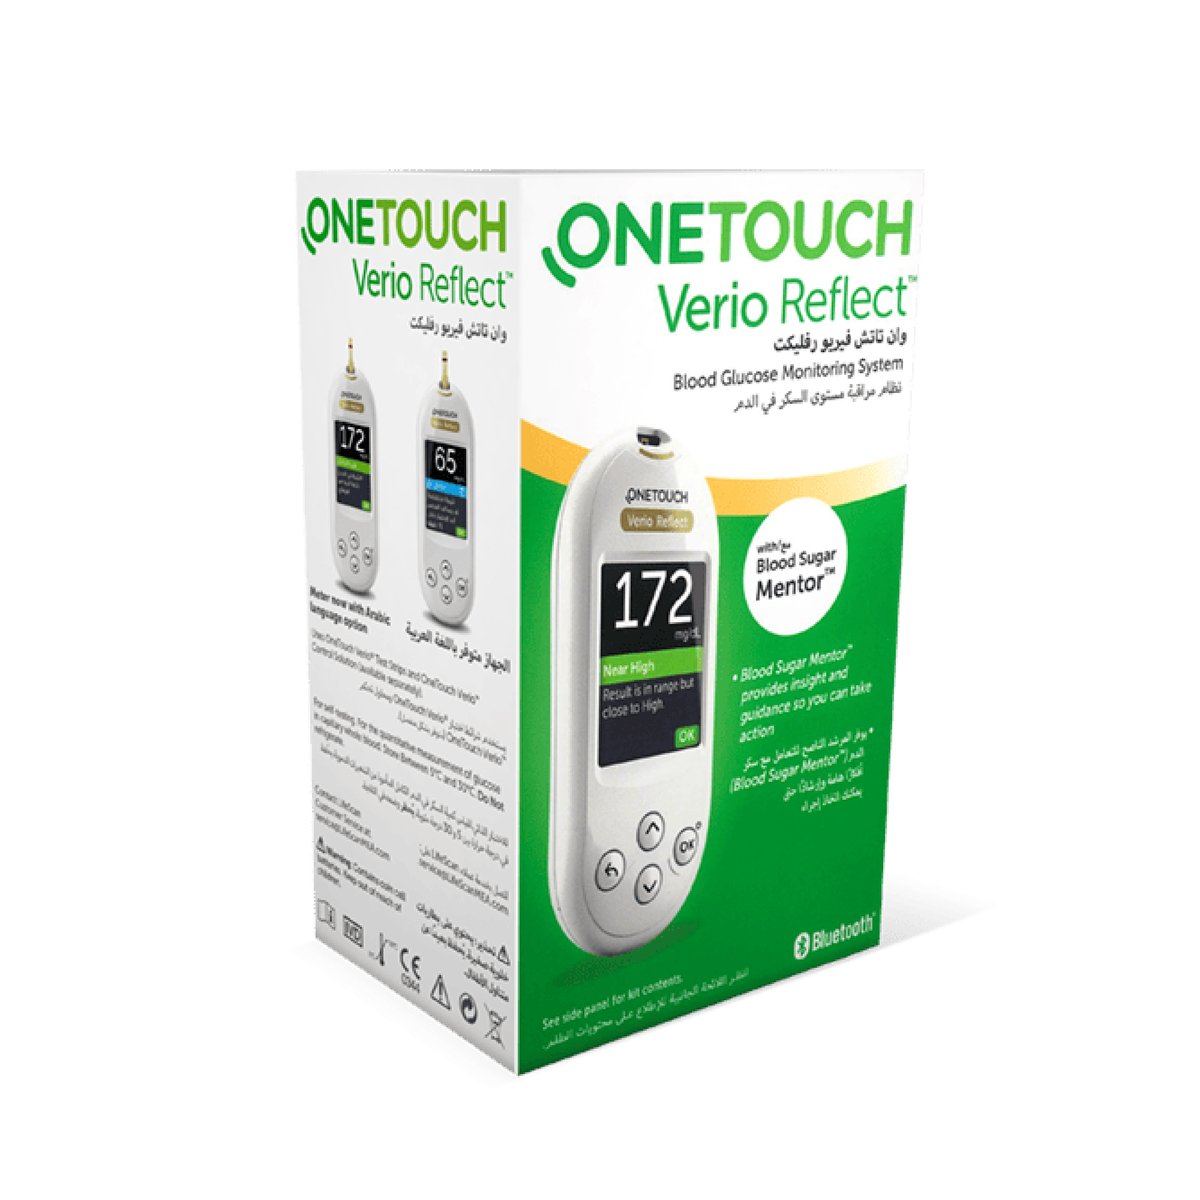 OneTouch Verio Reflect Glucose Meter Kit